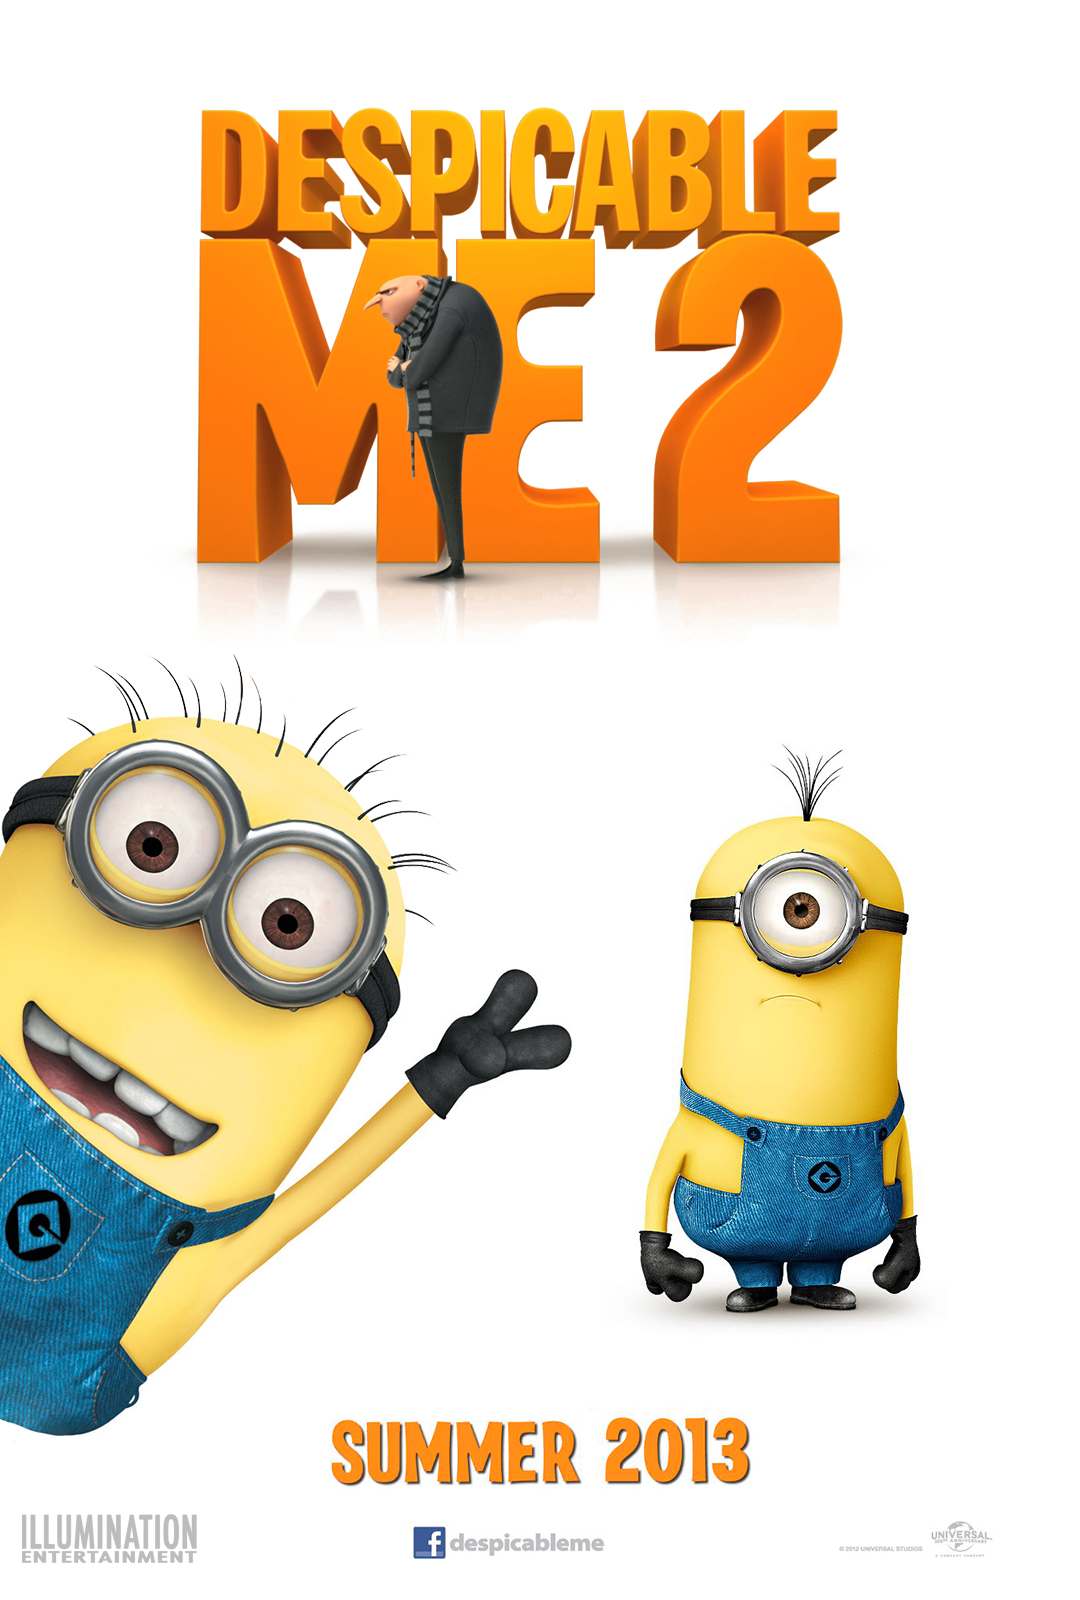 TODAY I WATCHED (TV-series, Movies, Cinema Playlists) 2013 - Page 4 176.image_.despicable-me-2-poster